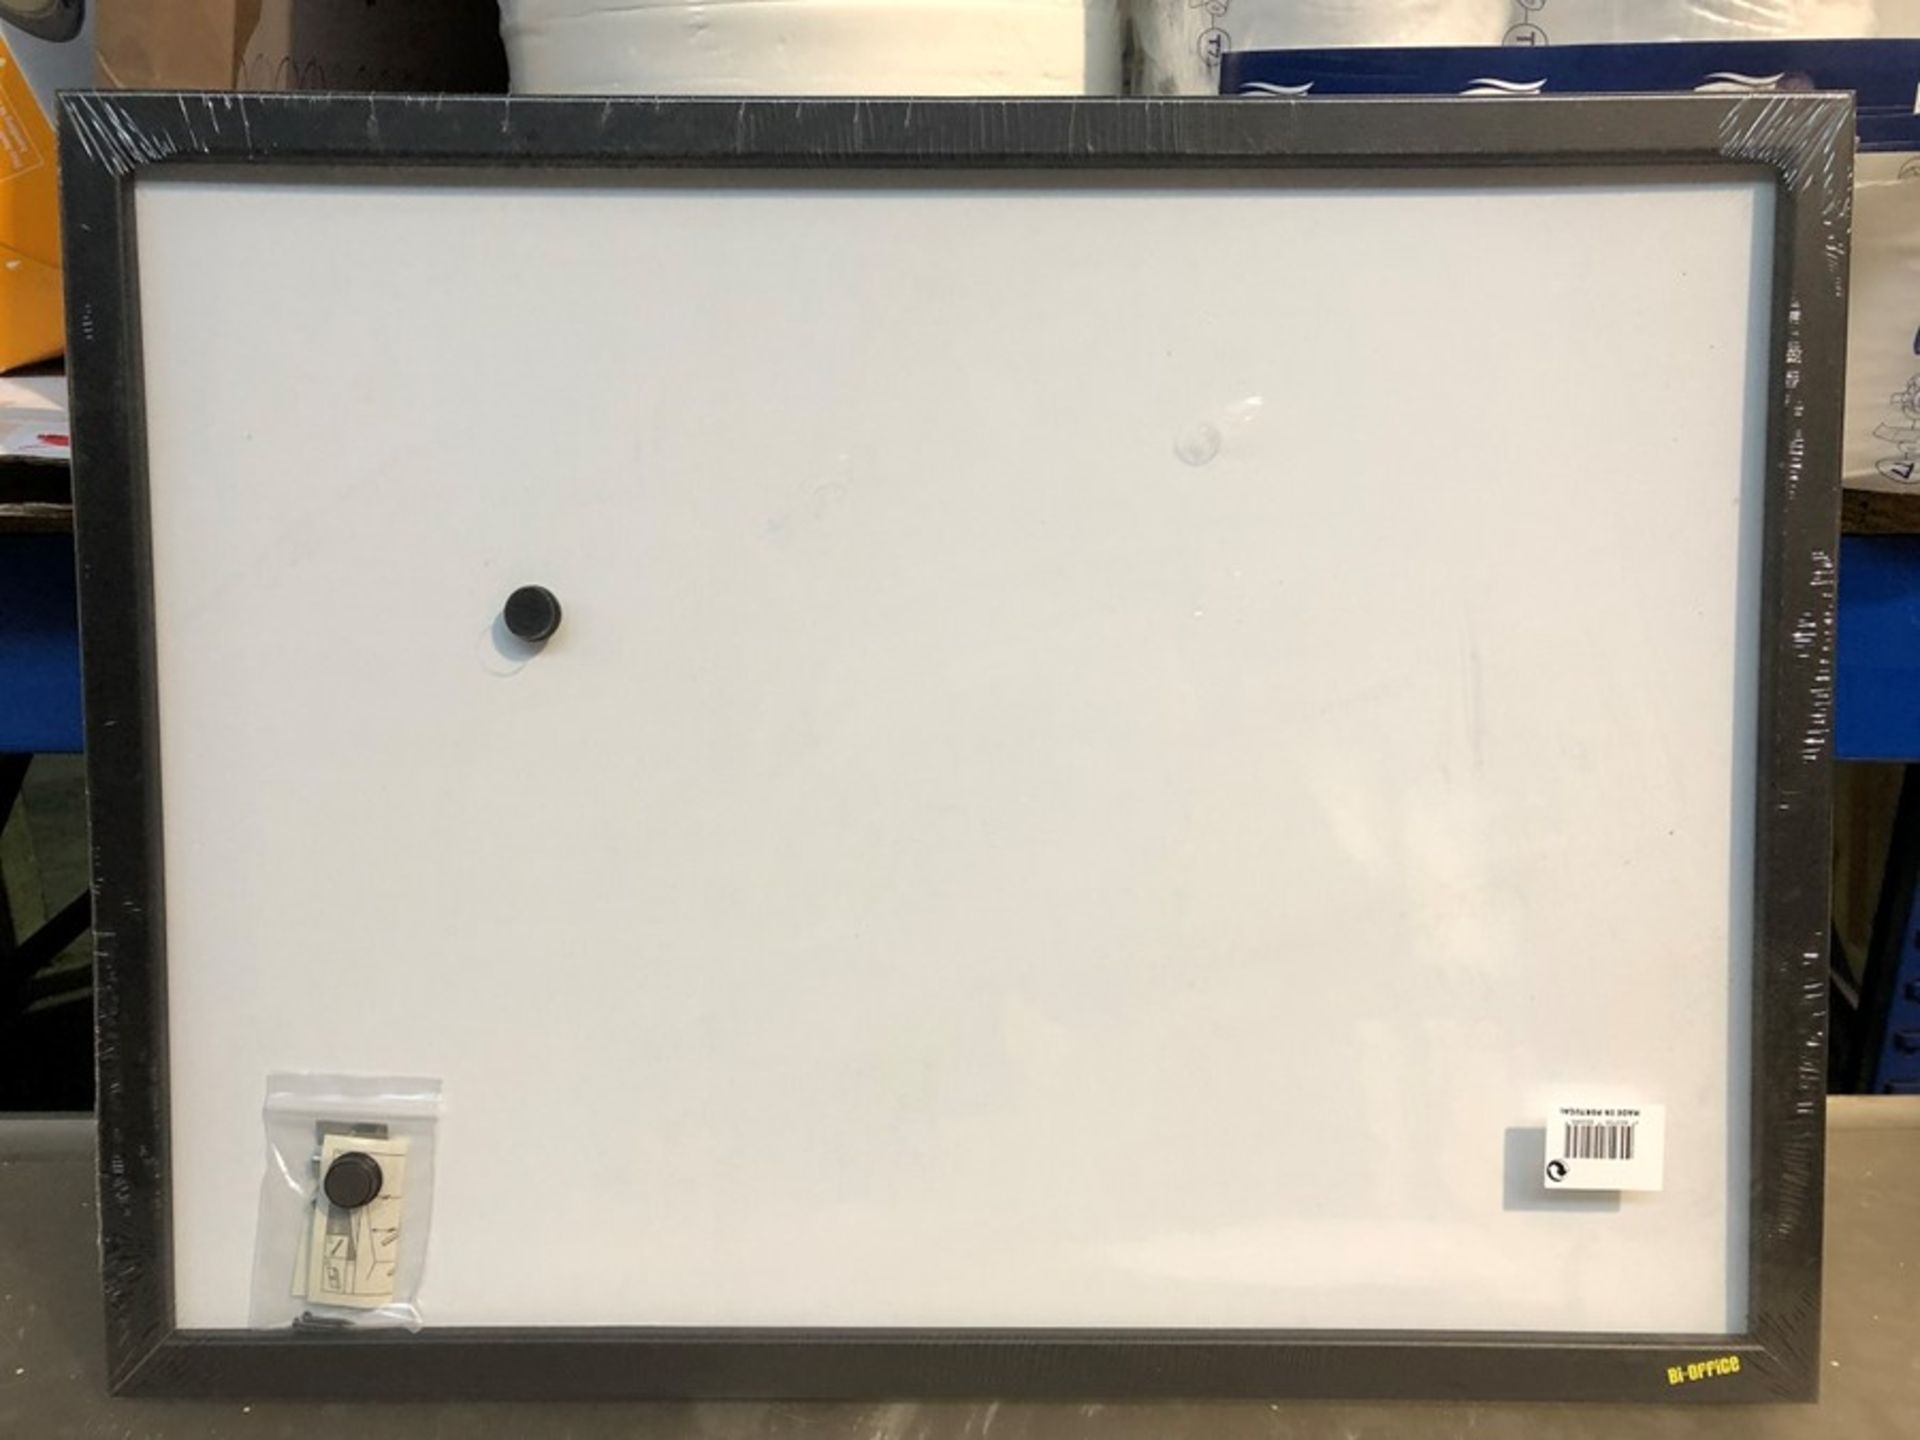 1 LOT TO CONTAIN 6 SEALED BI-OFFICE MAGNETIC WHITEBOARD WITH MATCHING SCREWS AND MAGNETS (PUBLIC